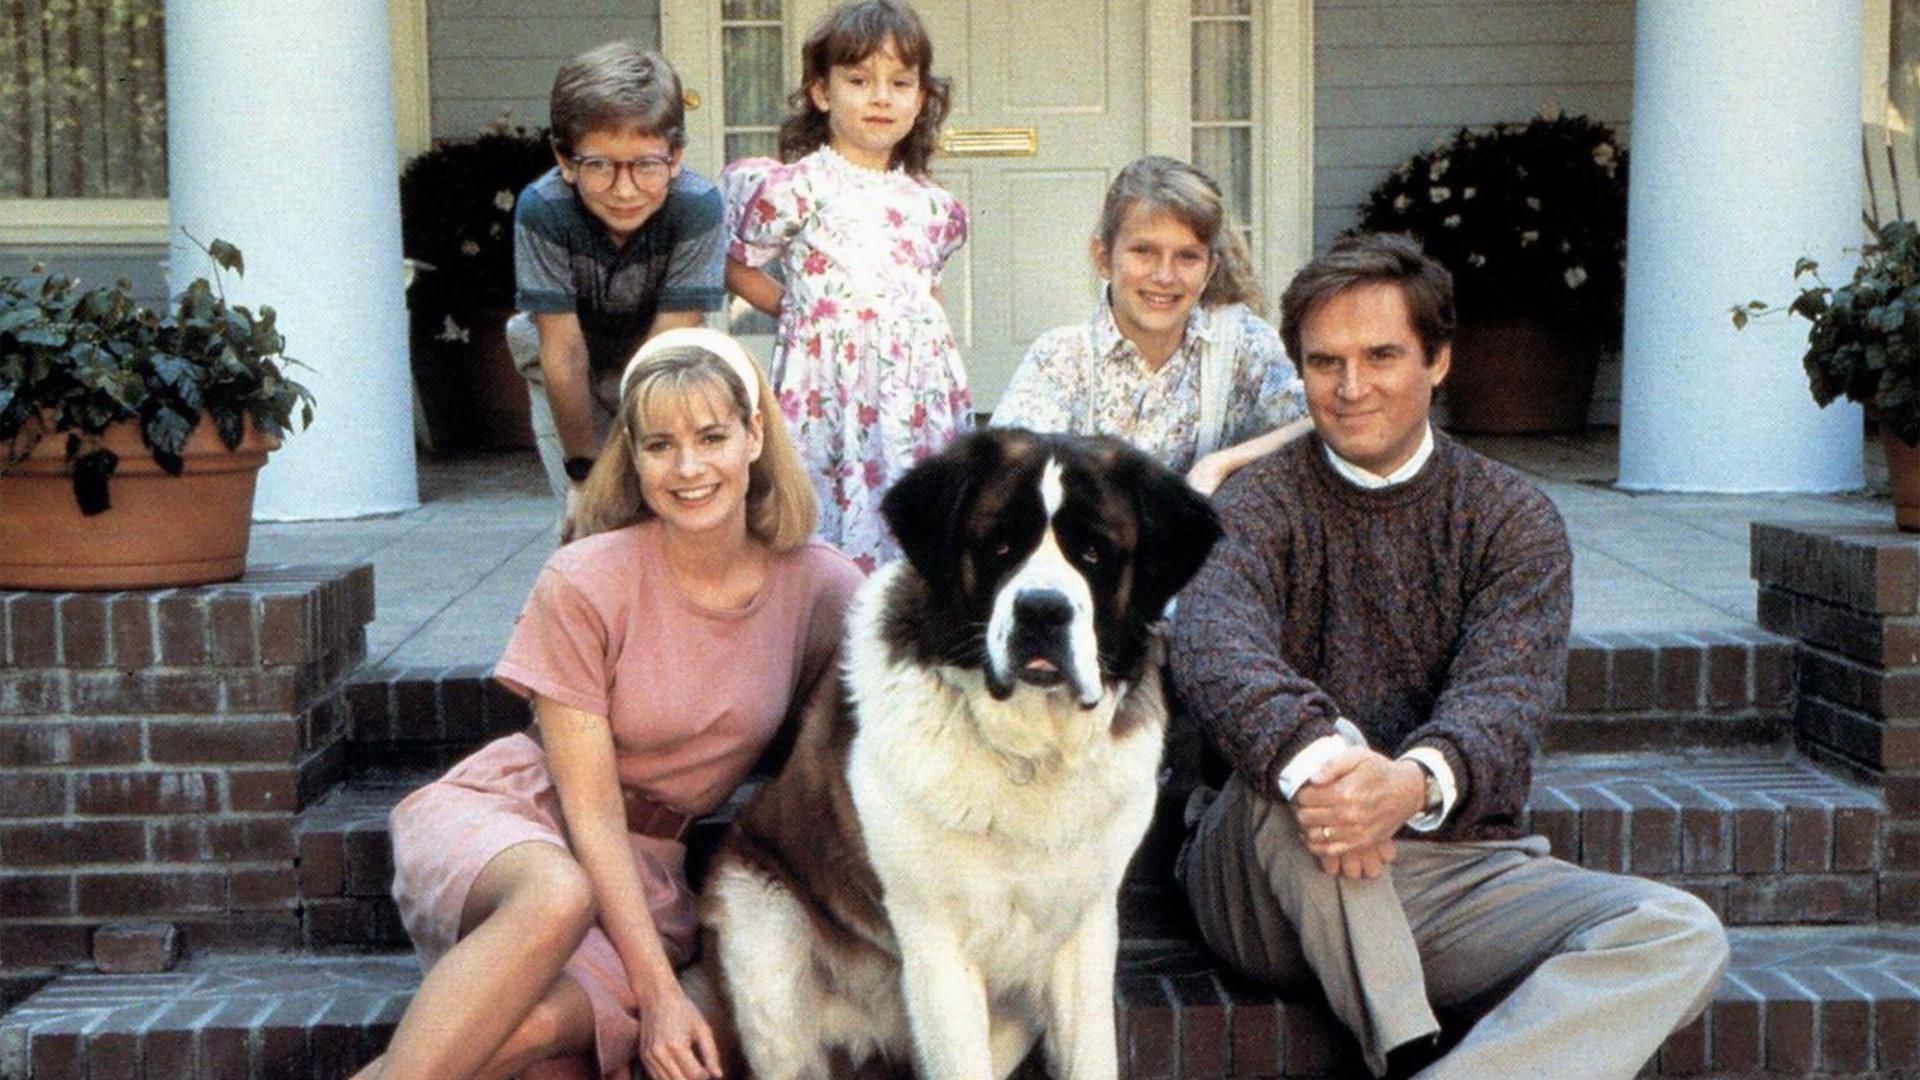 <p>                     A 1992 American family comedy movie featuring a St Bernard dog named after the German composer (the puppy barks along to Beethoven’s music). This is the story of how Beethoven walks into a family home and quickly becomes the centre of attention to the extent that the dad resents him, but must contend with a dog-napping vet and his henchmen before the jealous dad saves the day.                    </p>                                      <p>                     There were 12 doubles playing the main St Bernard – a fun, fluffy movie if you don’t mind a bit of big-dog slobber. Fun fact: St Bernards are one of the largest dog breeds in the world.                   </p>                                      <p>                     <br>                   </p>